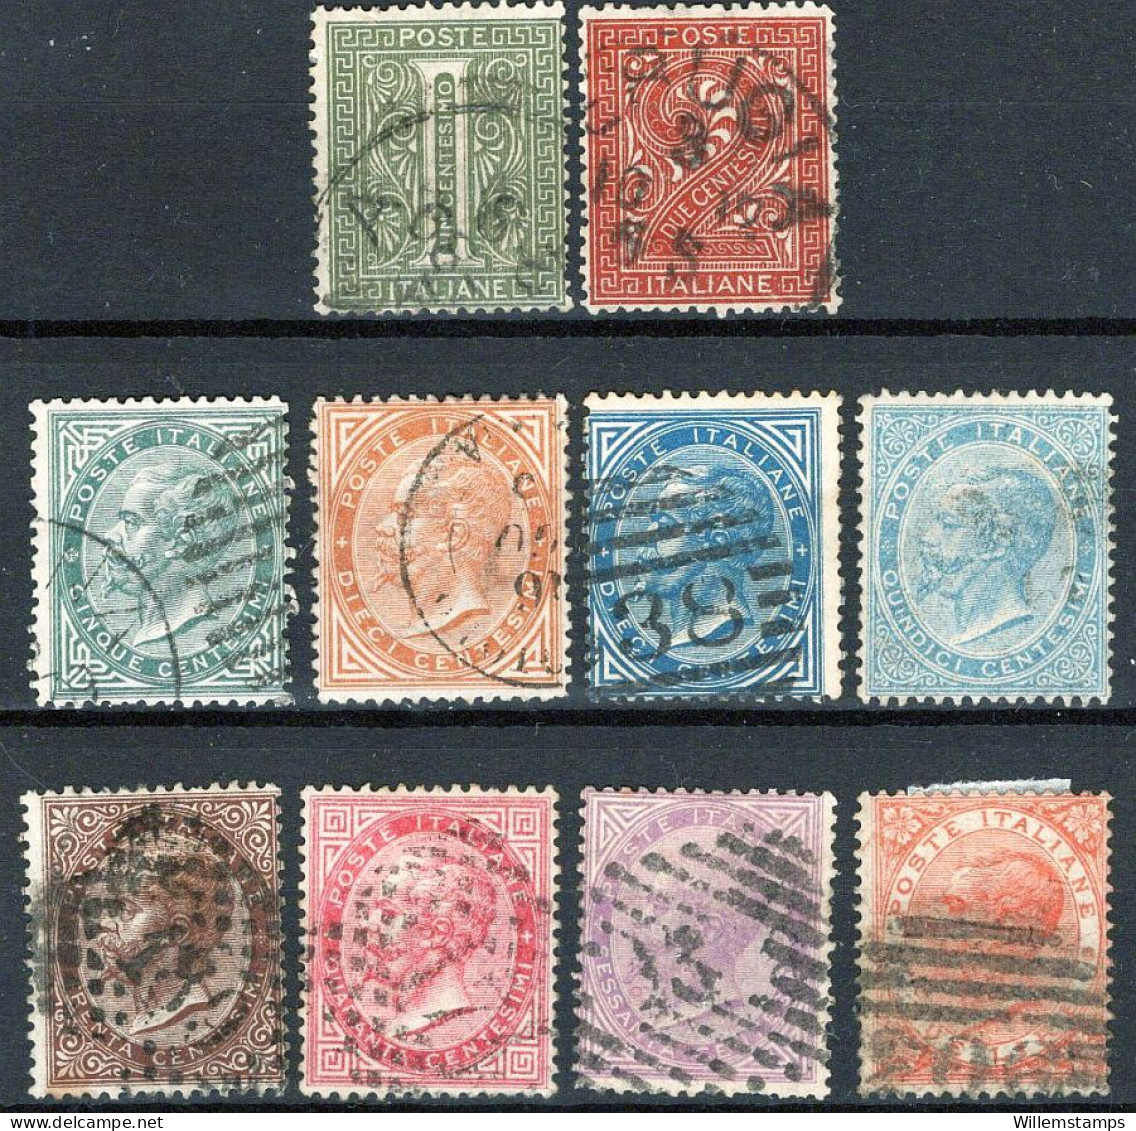 Italy 1863 Michel Nrs 16-23 Sassone Nrs 14-22 (it-2-1) - Used